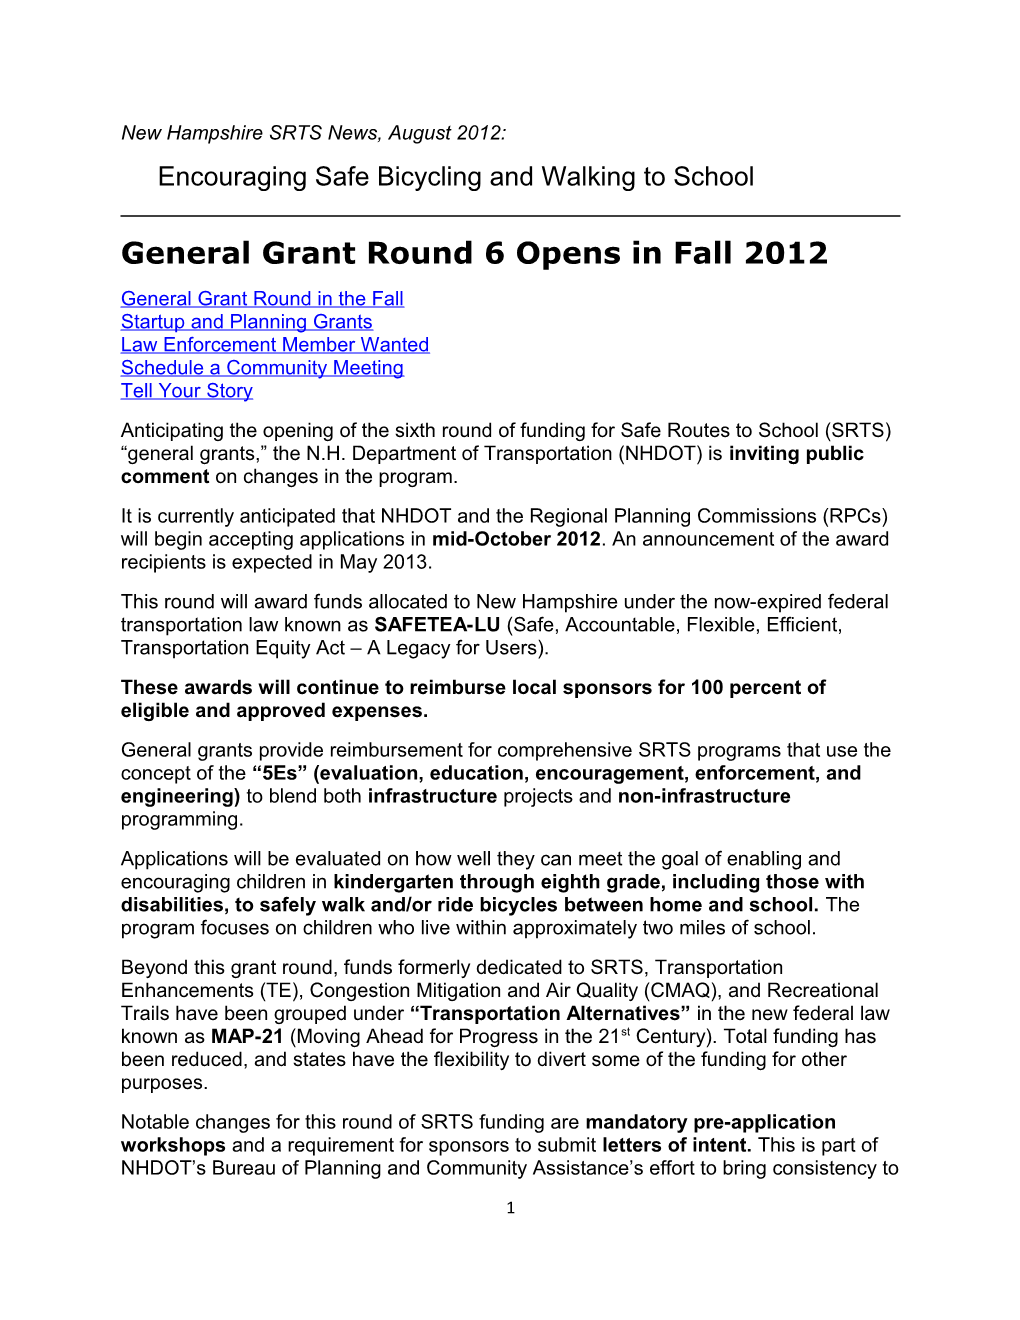 General Grant Round 6 Opens in Fall 2012